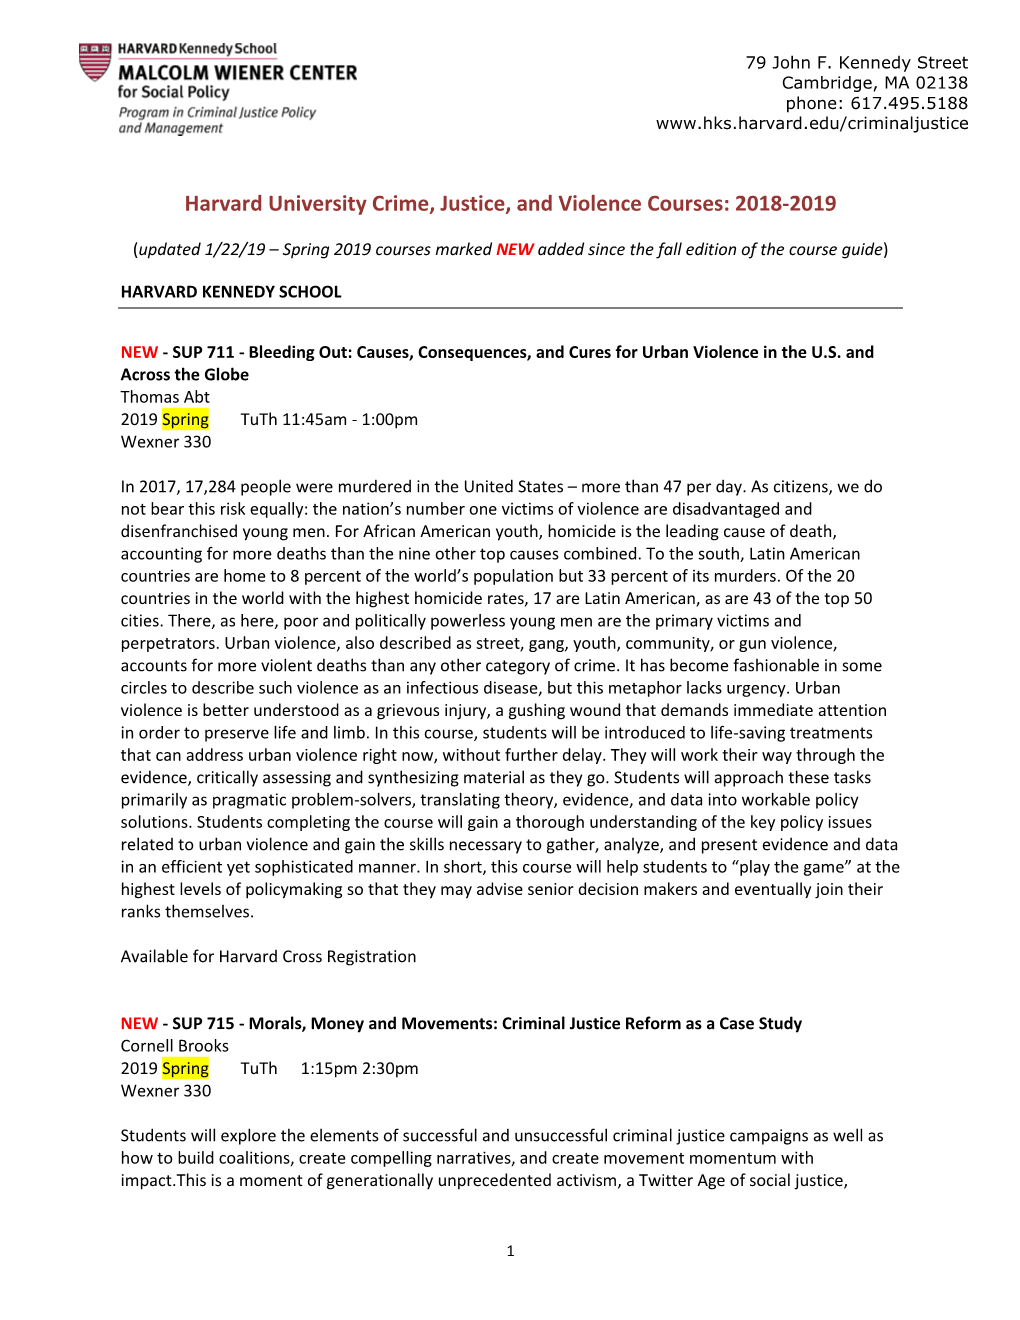 Harvard University Crime, Justice, and Violence Courses: 2018-2019